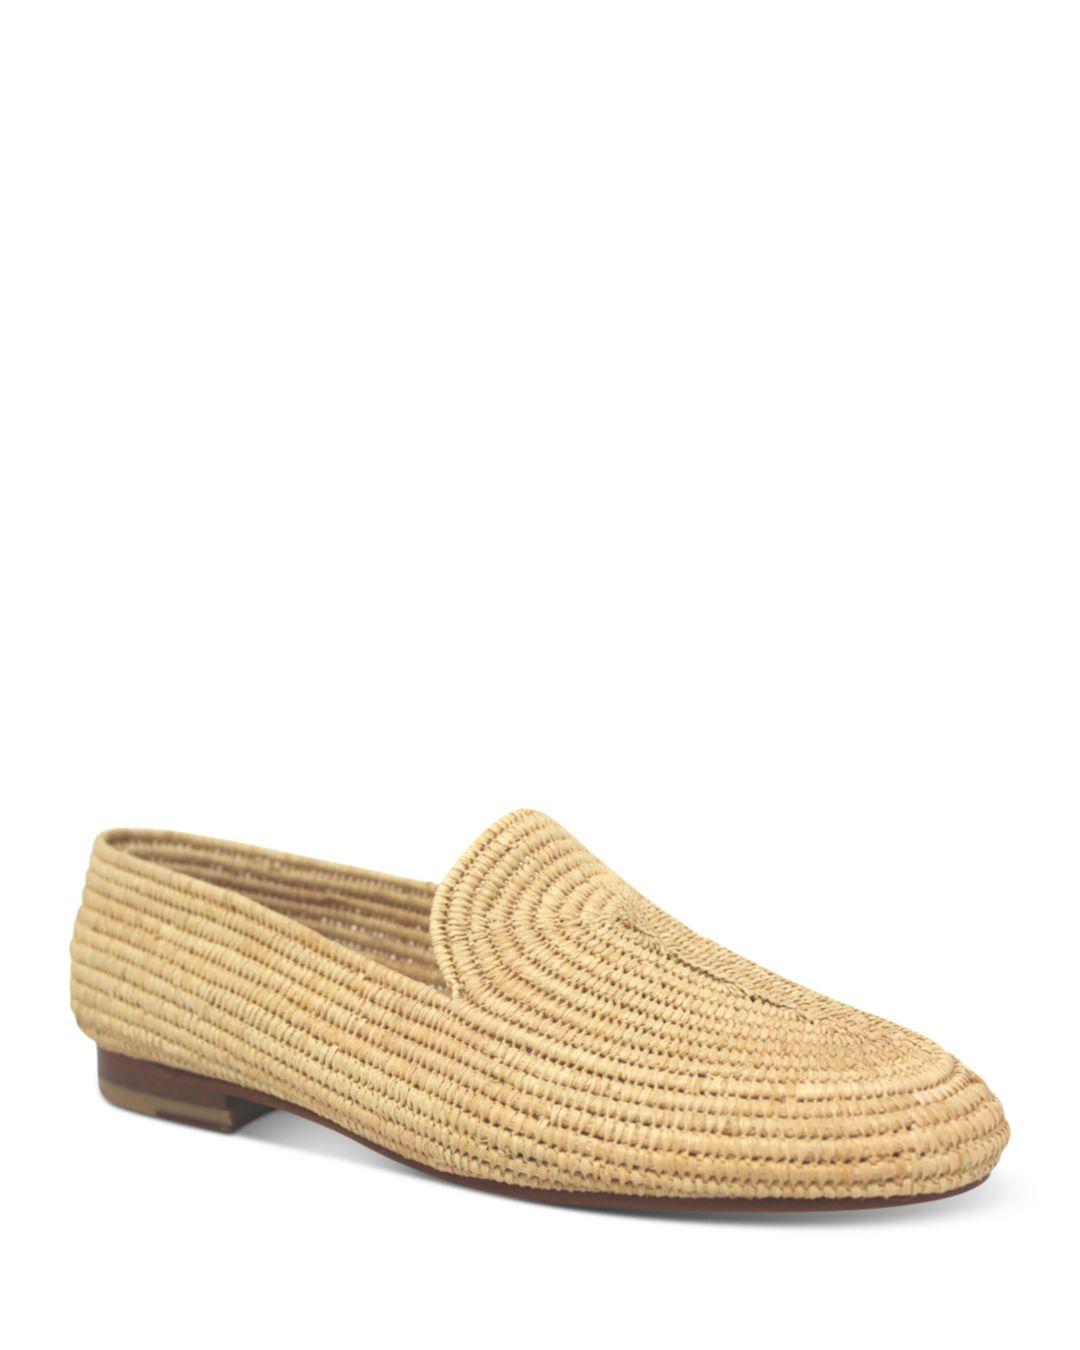 Carrie Forbes Atlas Slip On Woven Loafer Flats in Natural | Lyst